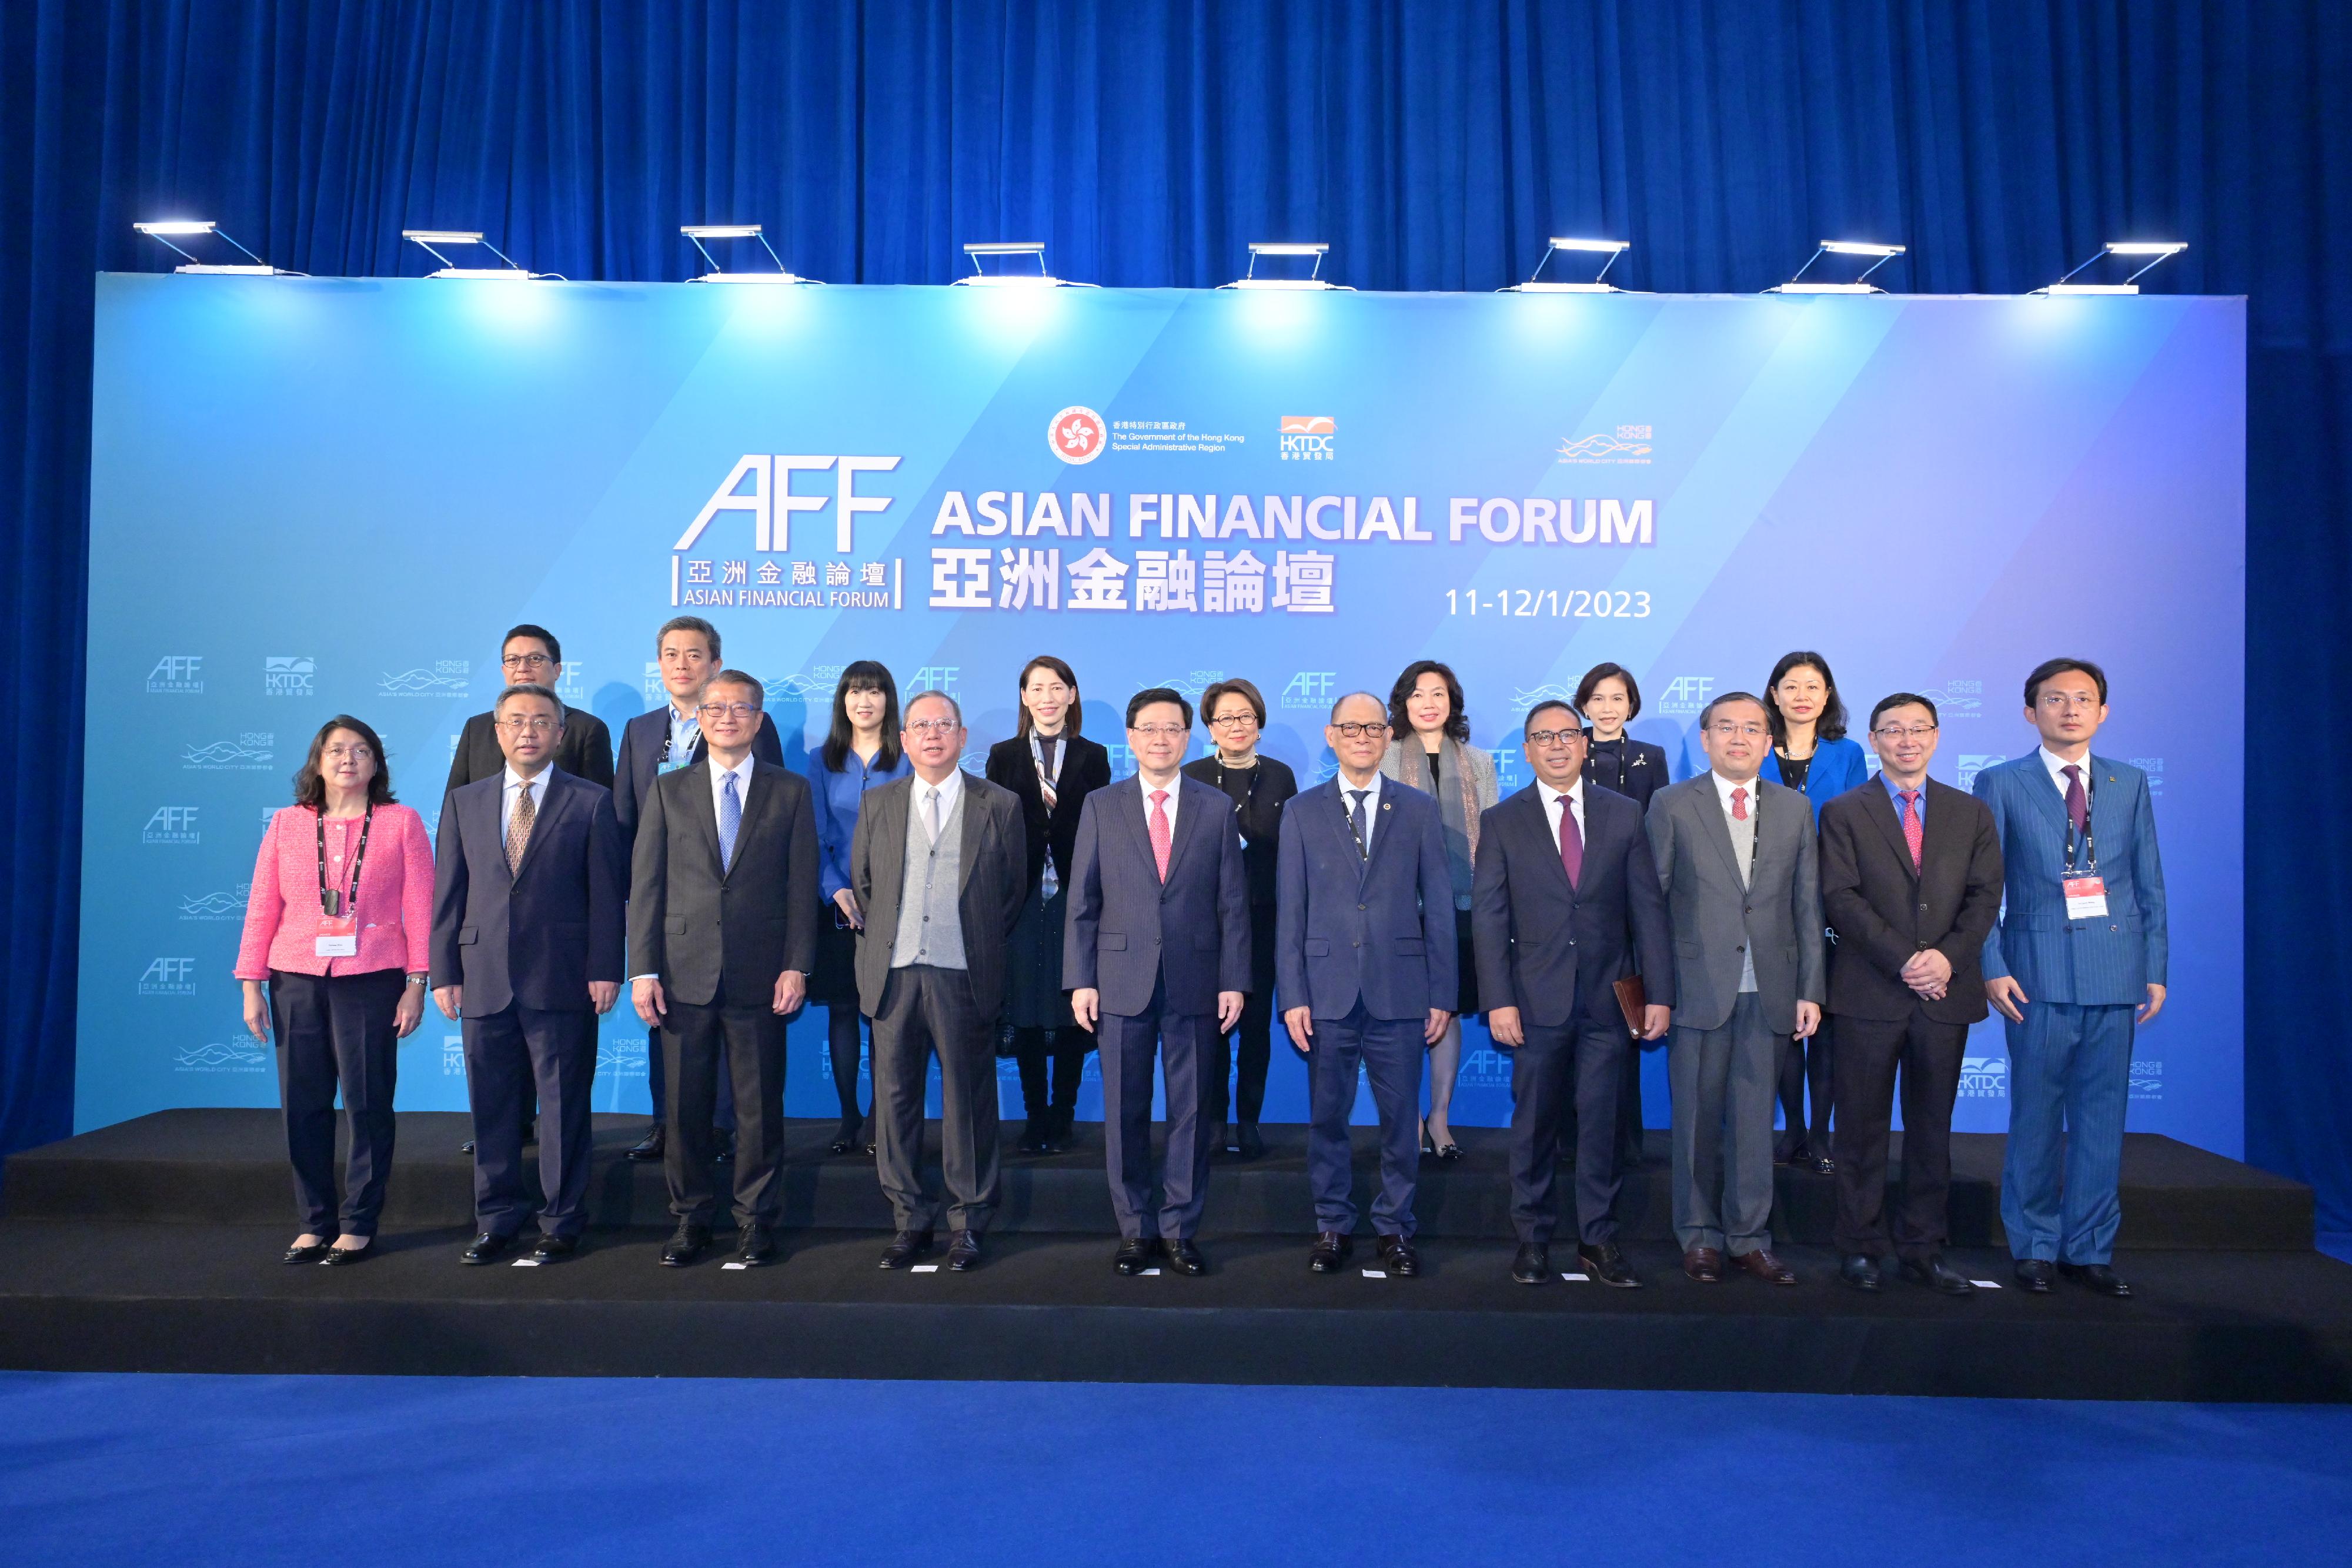 The Chief Executive, Mr John Lee, attended the Asian Financial Forum at the Hong Kong Convention and Exhibition Centre this morning (January 11). Photo shows (front row, from second left) Deputy Commissioner of the Office of the Commissioner of the Ministry of Foreign Affairs of the People's Republic of China in the Hong Kong Special Administrative Region Mr Yang Yirui; the Financial Secretary, Mr Paul Chan; the Chairman of the Hong Kong Trade Development Council, Dr Peter Lam; Mr Lee; the Secretary of the Department of Finance, the Philippines, Dr Benjamin Diokno; the Chief Executive Officer of the Indonesia Investment Authority, Dr Ridha Wirakusumah; the Secretary for Financial Services and the Treasury, Mr Christopher Hui, and other major guests before the opening session.